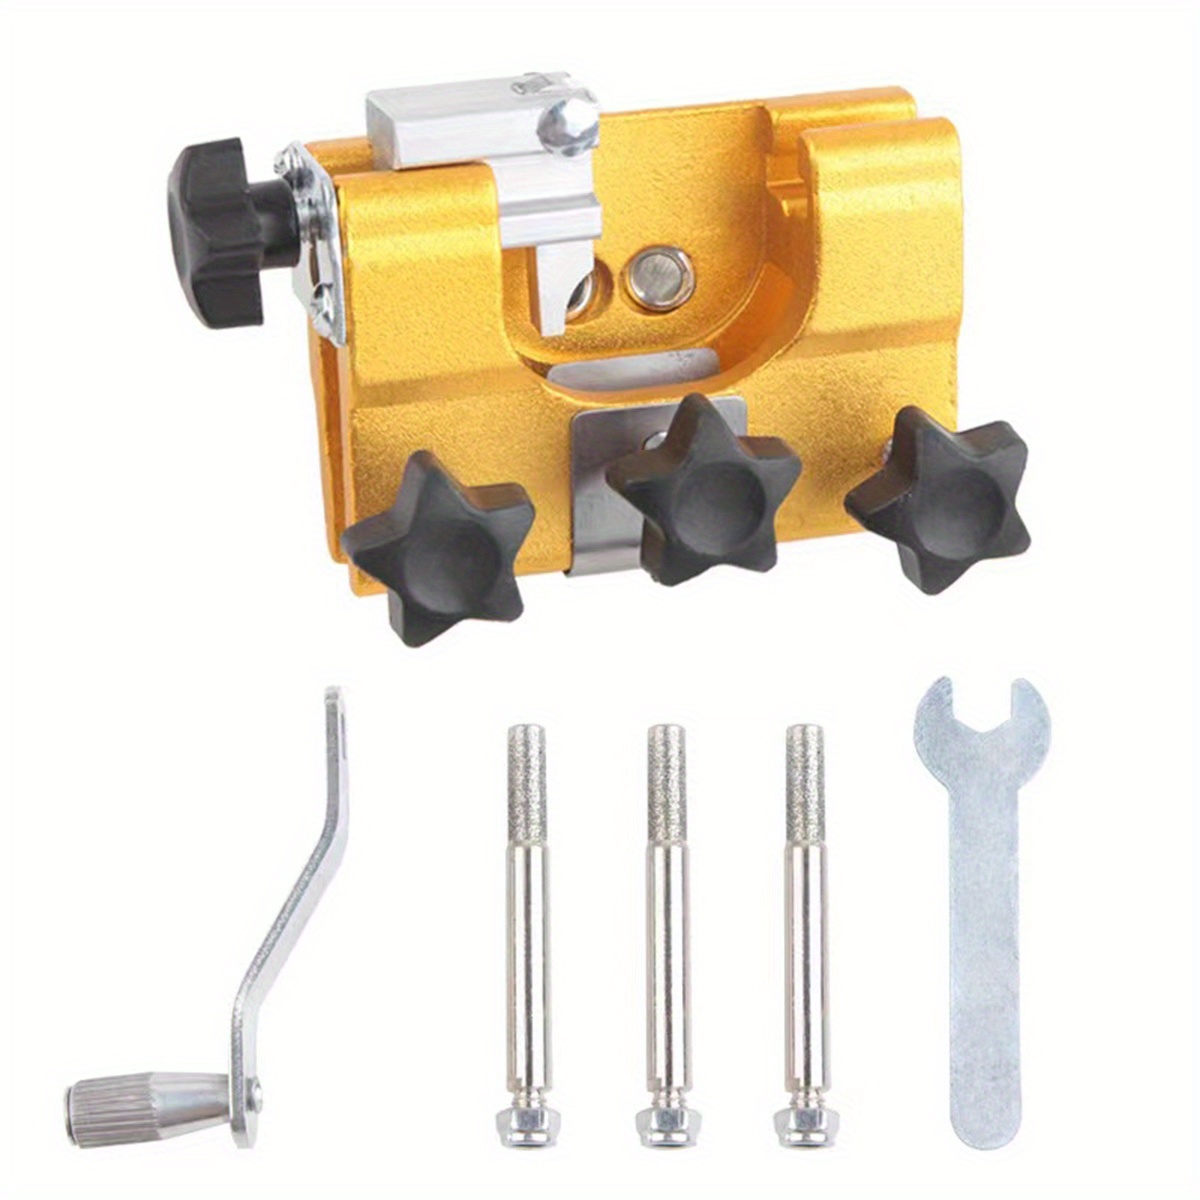 1 Set Chainsaw Sharpening Kit, Quick Chainsaw Sharpening Tool, Portable  Chainsaw Sharpener Clamp, Manual Crank Chainsaw Blade Blade, Electric  Chainsaw